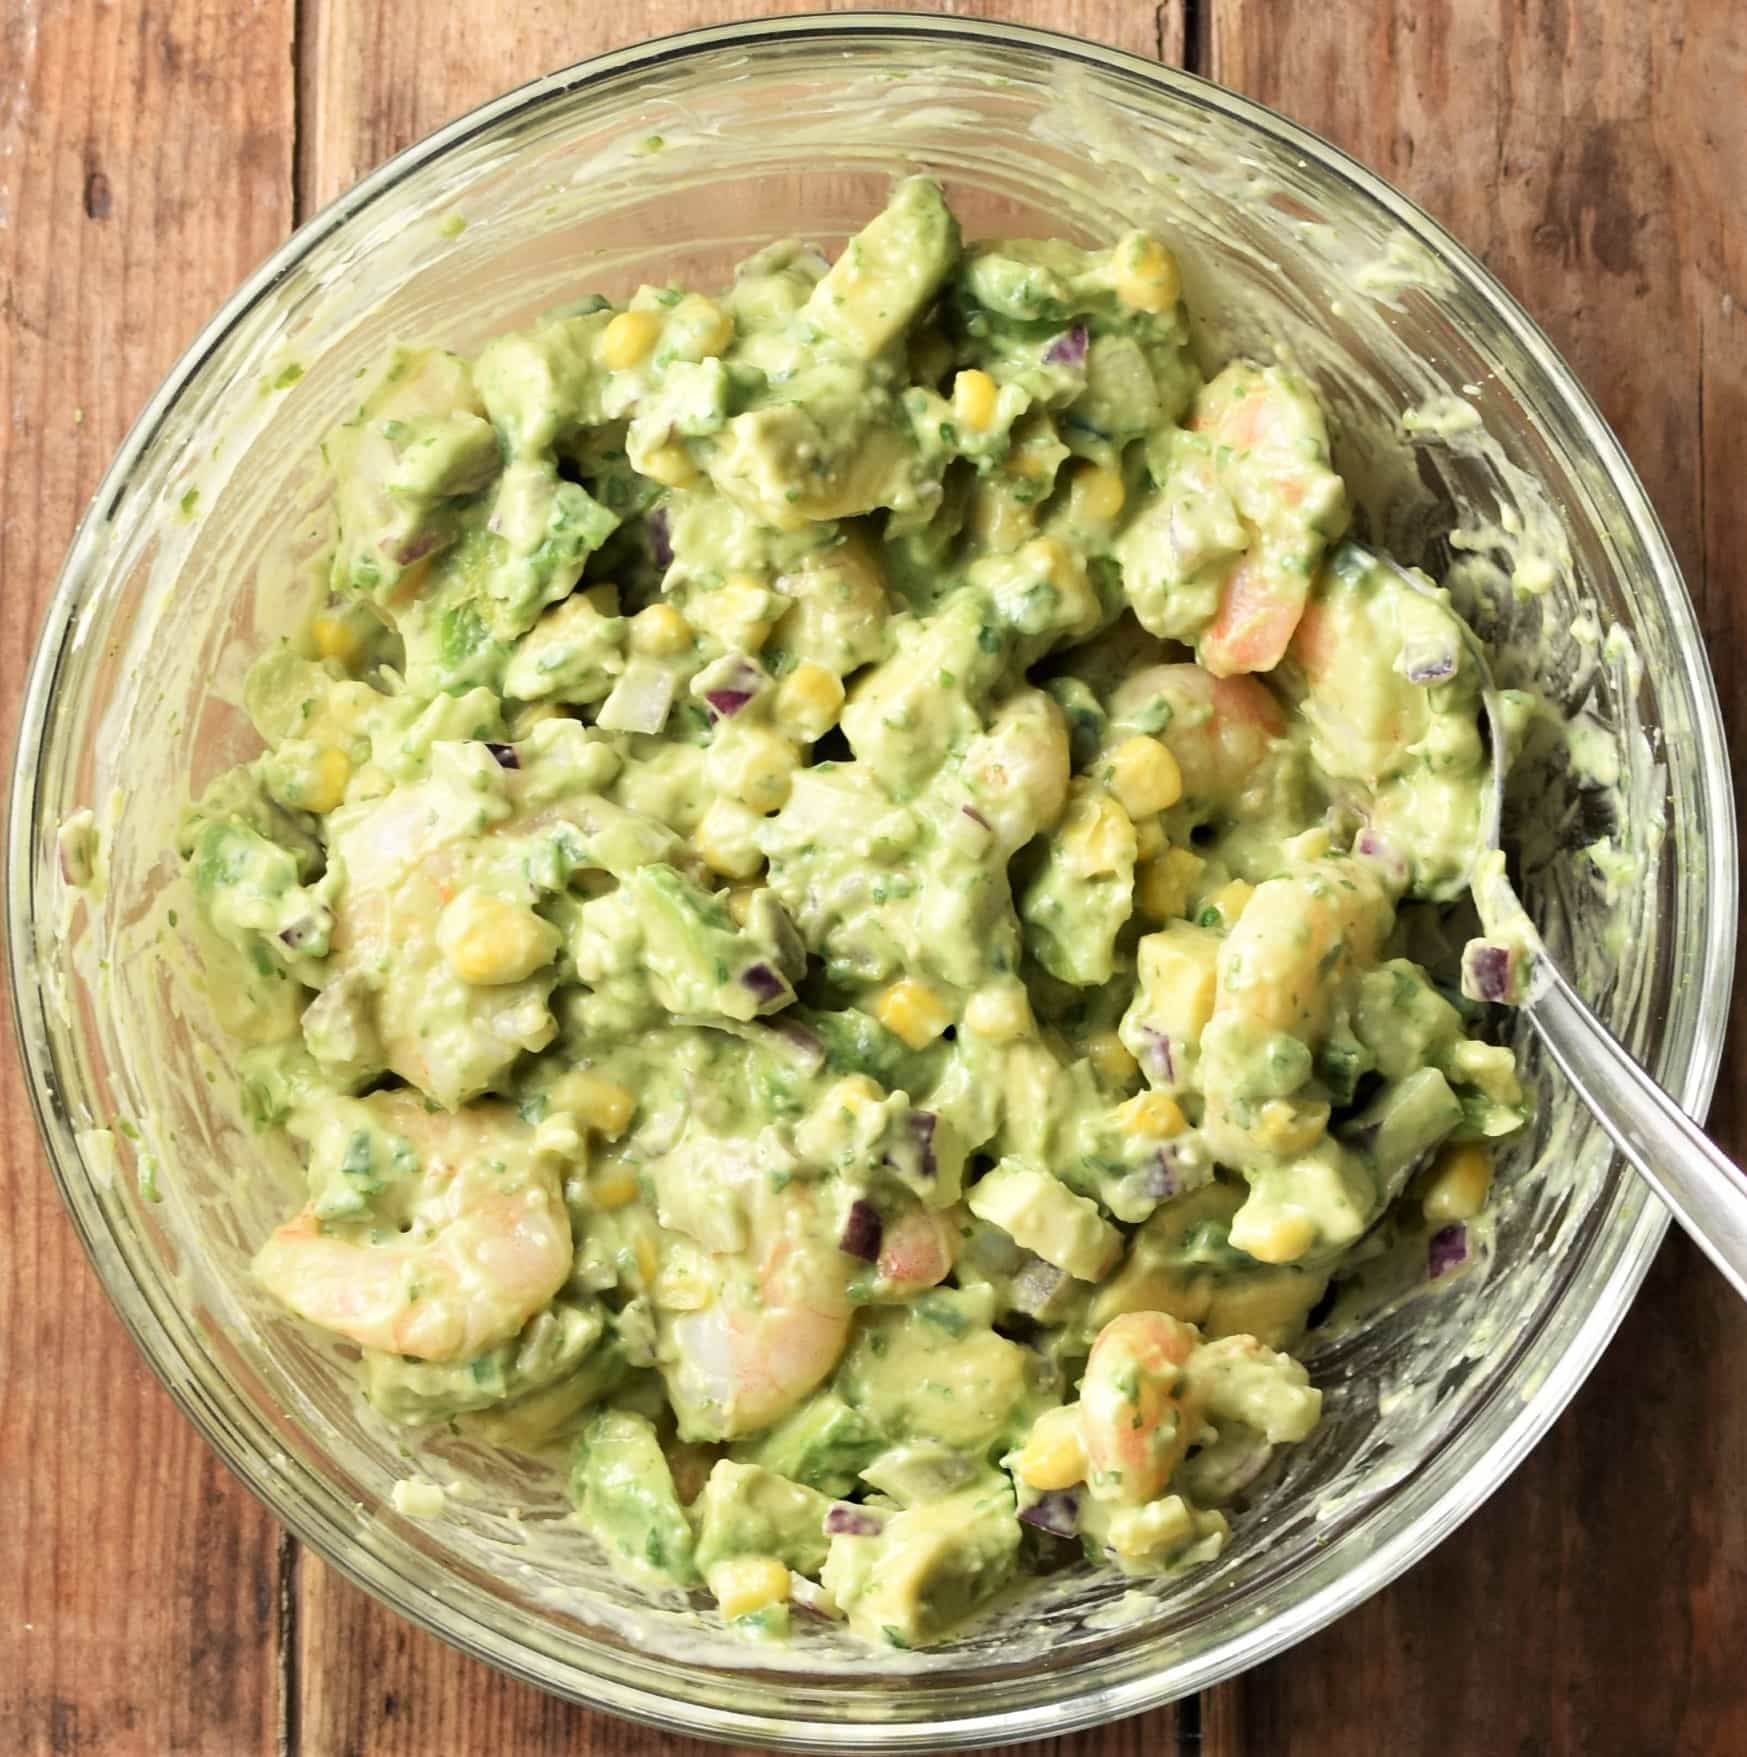 Creamy avocado and shrimp mixture in mixing bowl with spoon.